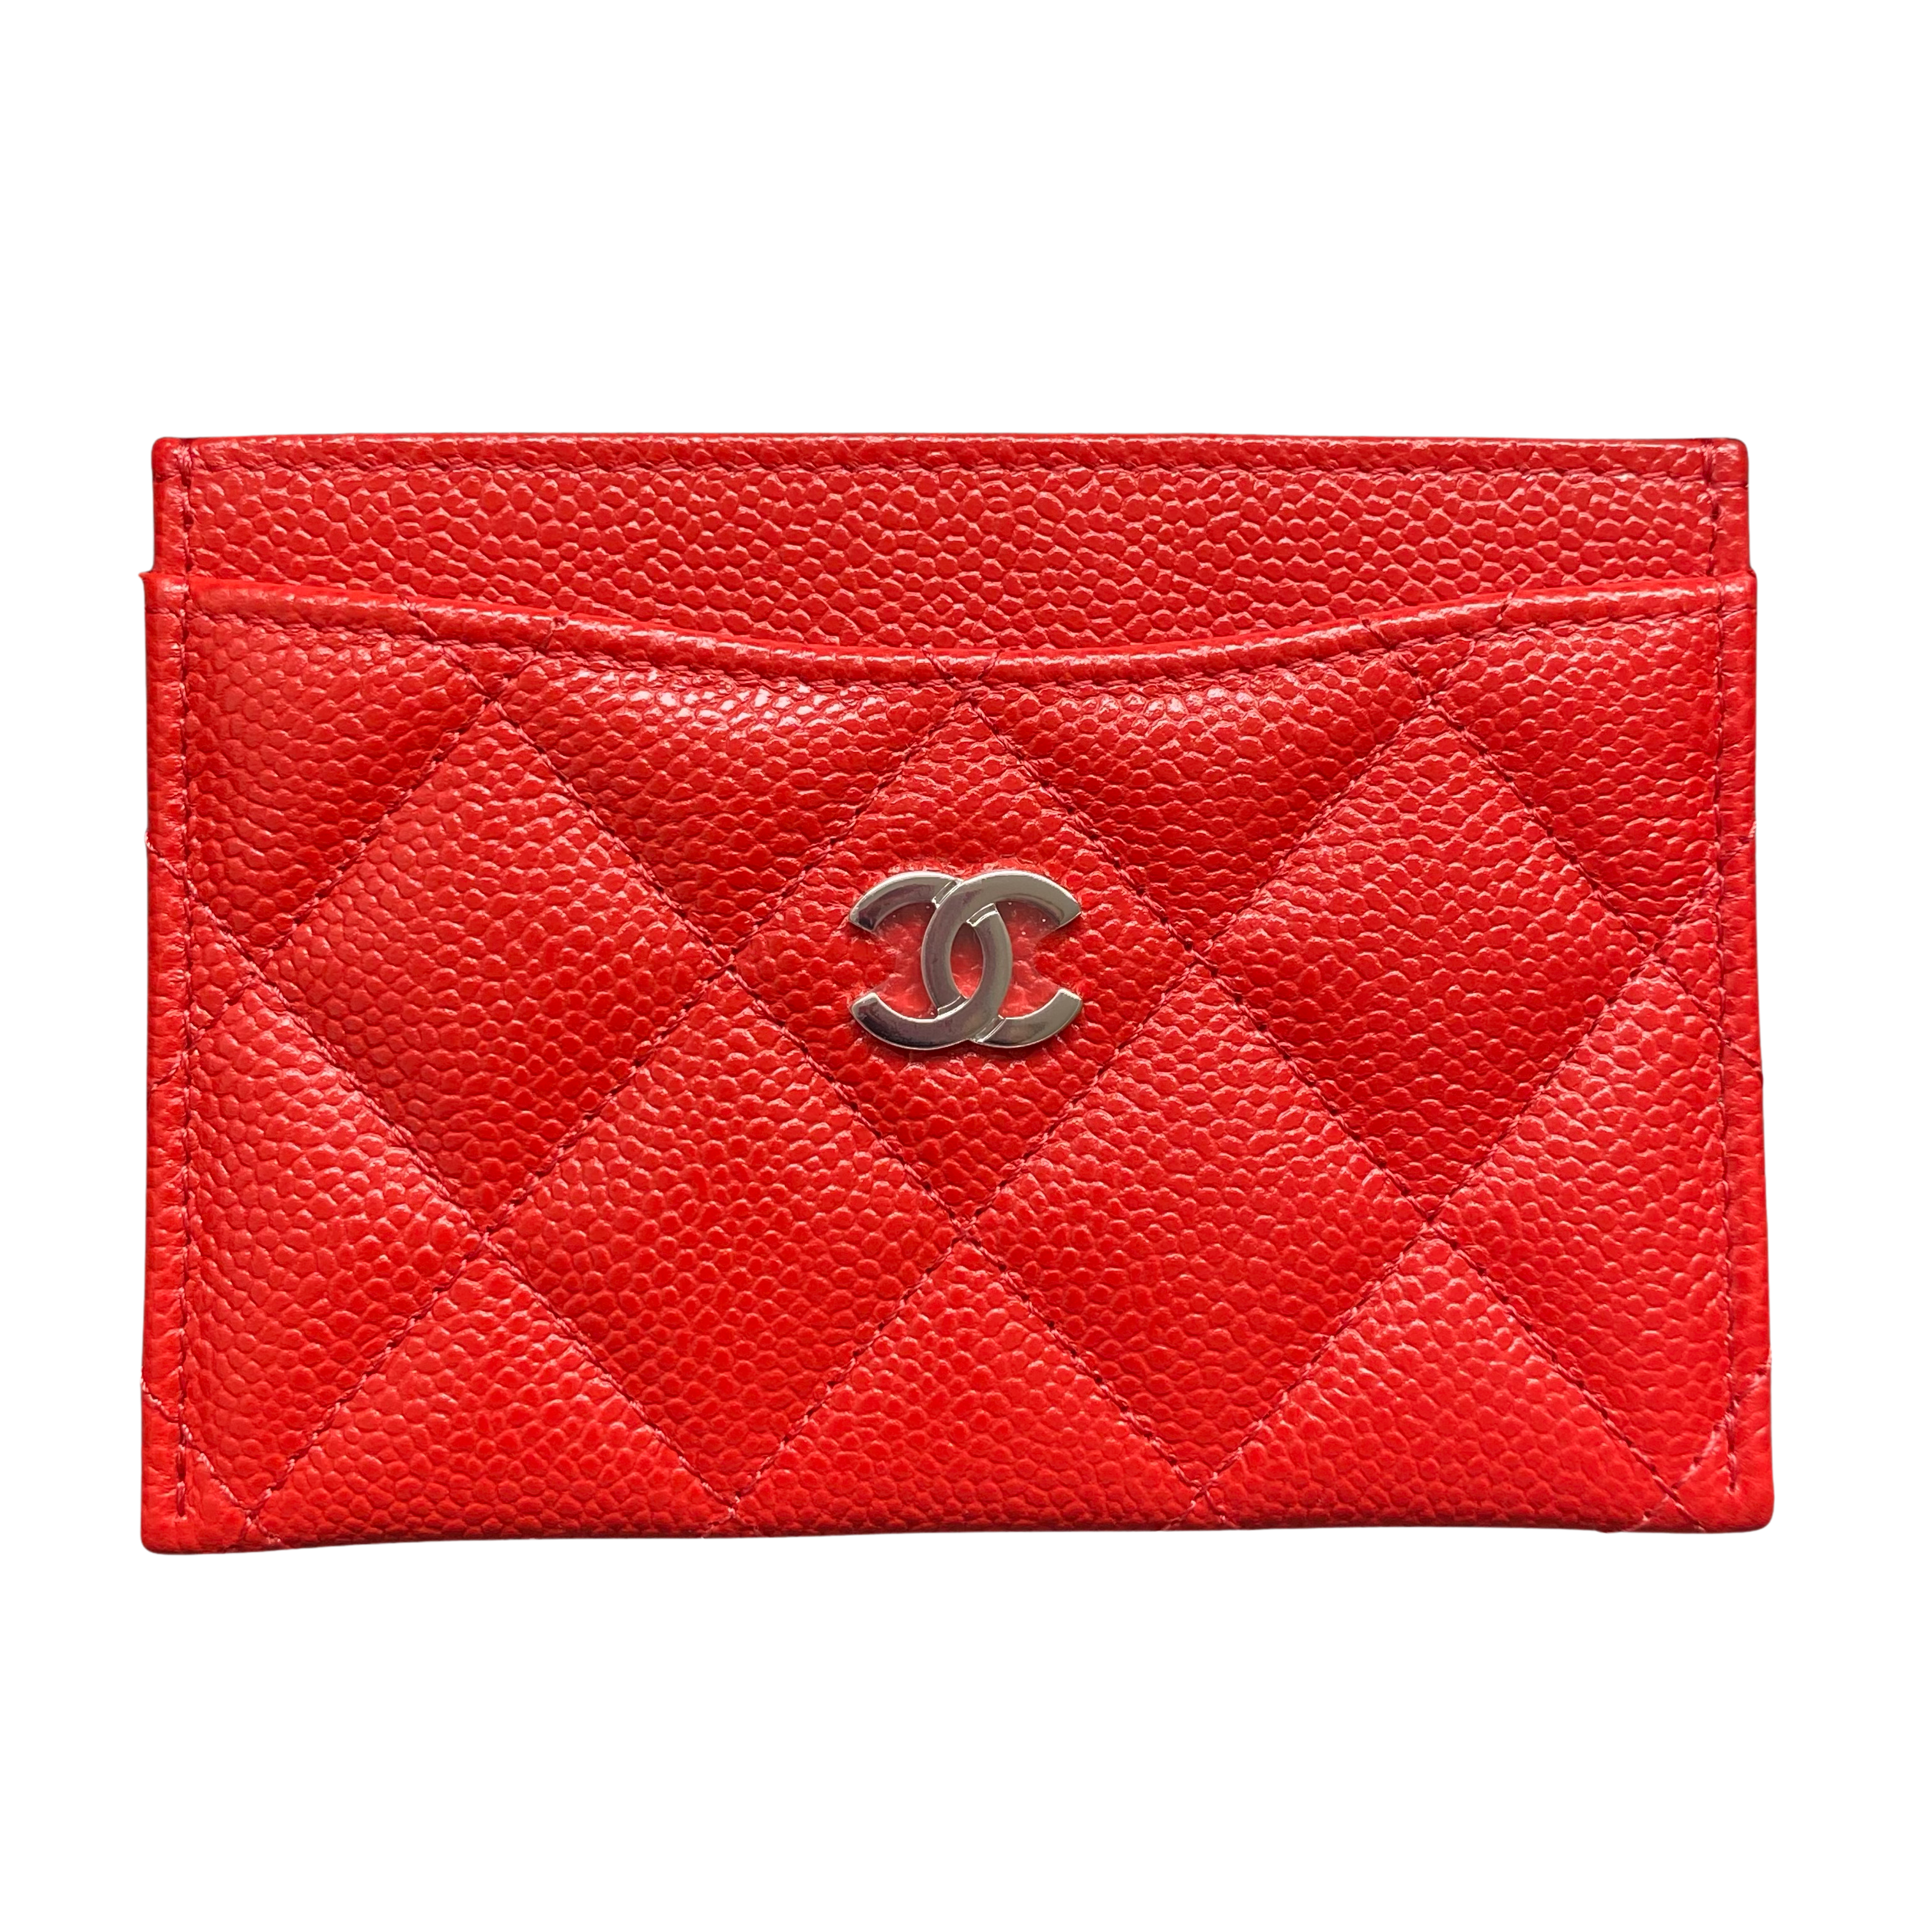 Chanel Card Holder Red Caviar Price , $475 Contact 267-270-7723